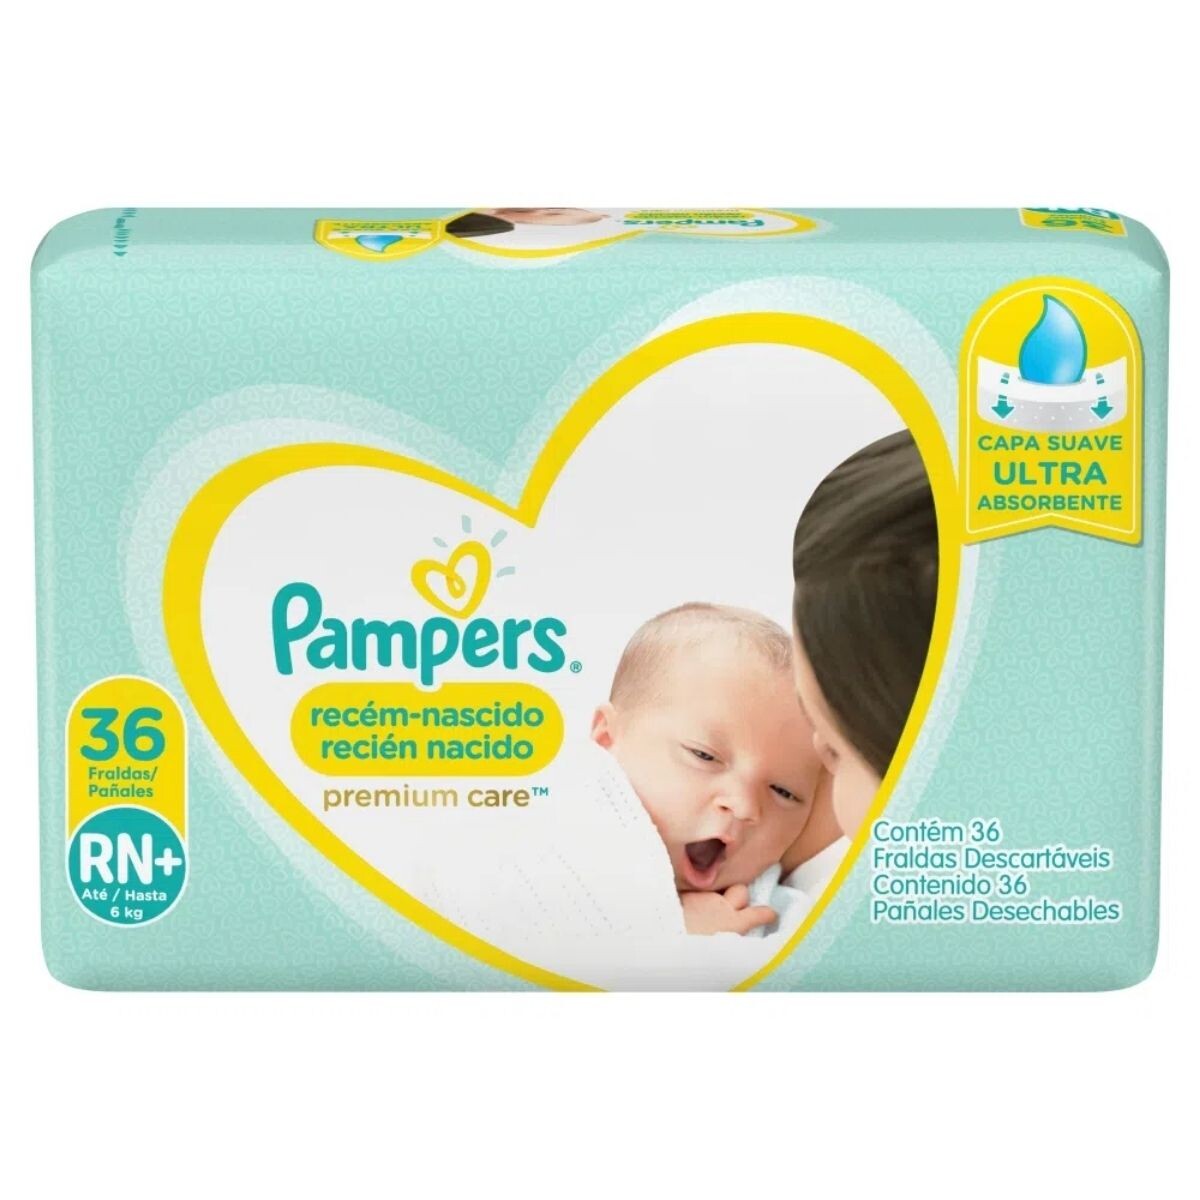 Pañales Pampers Premium Care RN+ X36 